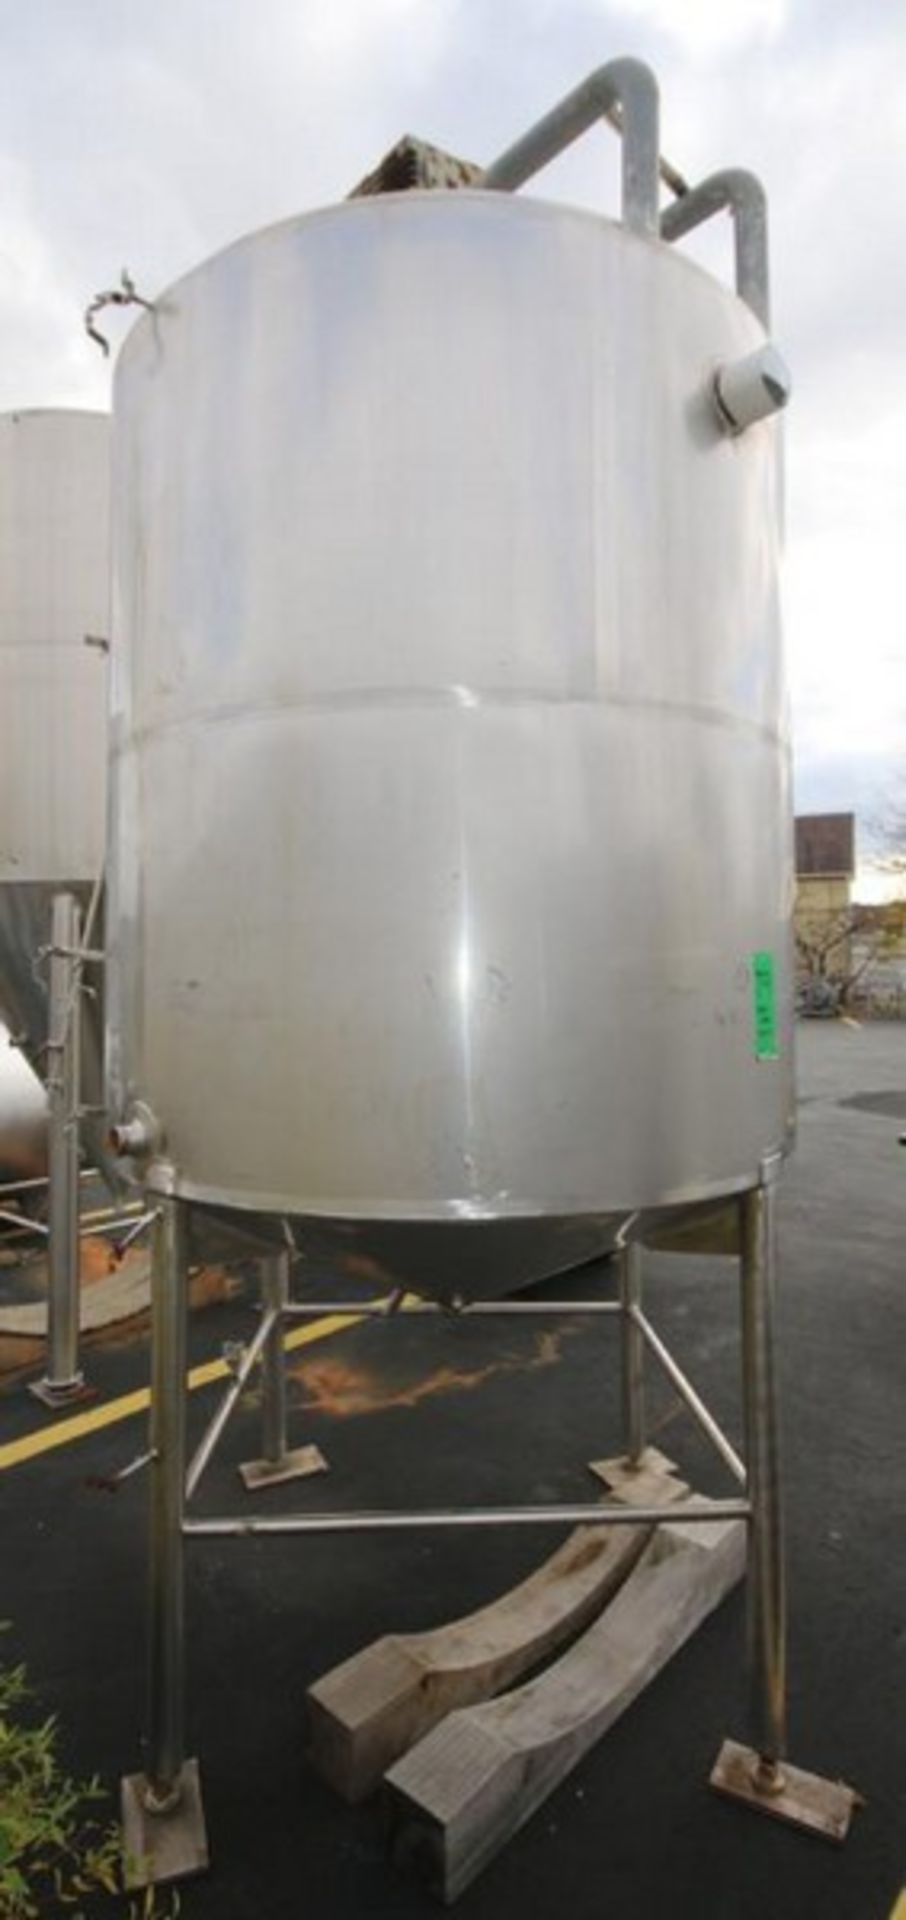 Aprox. 1,000 Gal. S/S Jacketed Tank, Dome Top Cone Bottom, with 5/2.5 hp 1740/840 RPM Agitator, 460V - Image 8 of 9